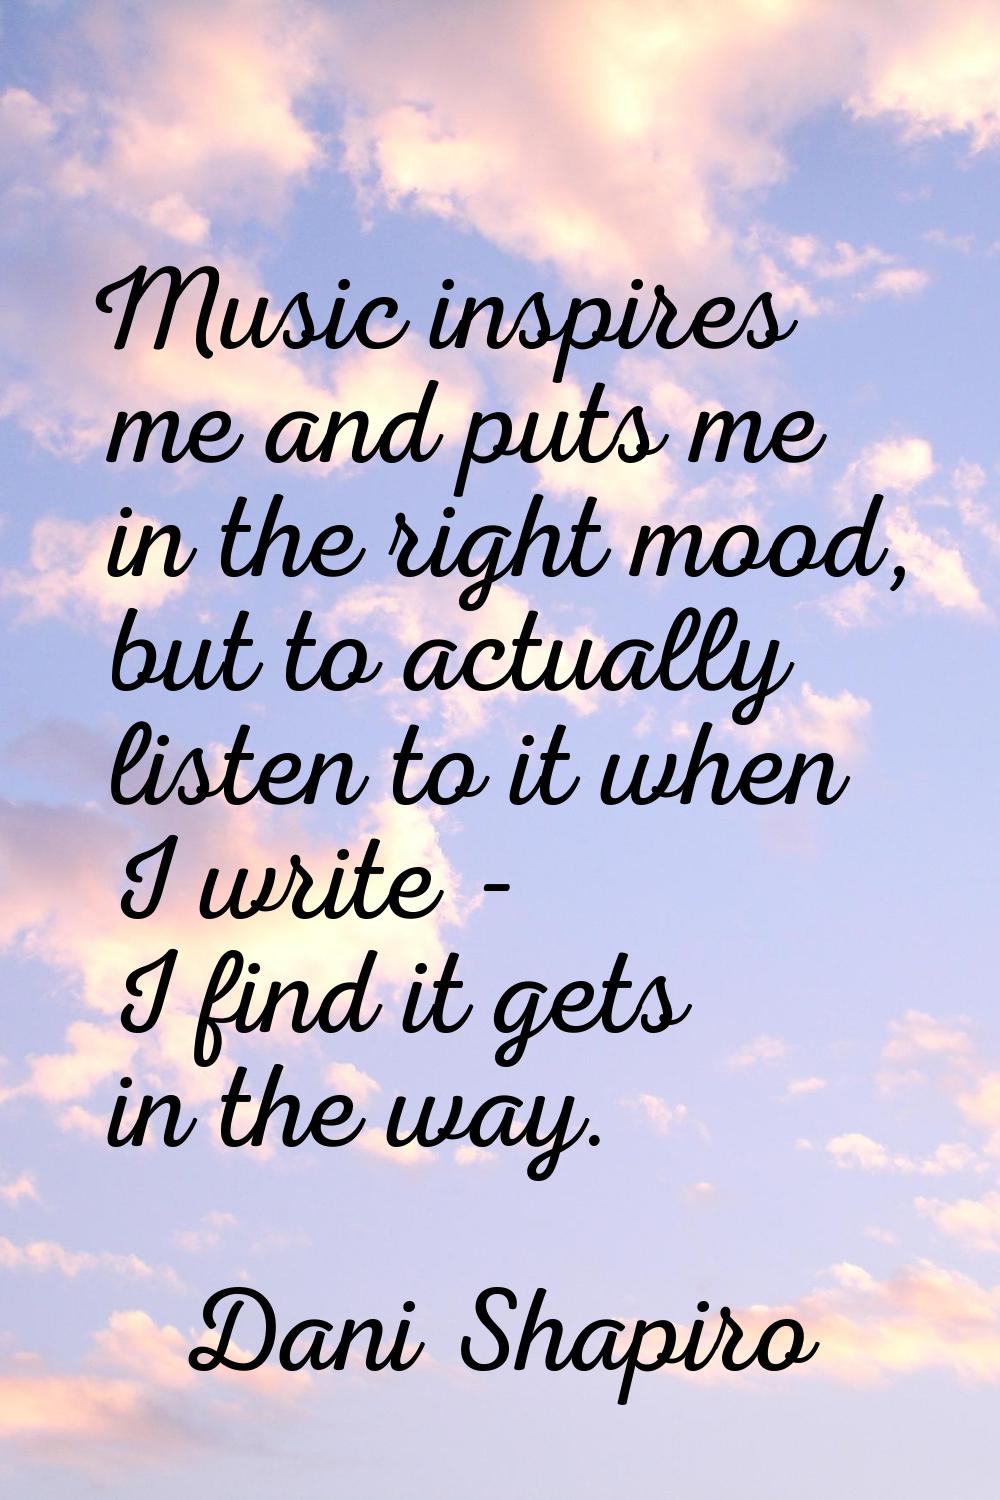 Music inspires me and puts me in the right mood, but to actually listen to it when I write - I find